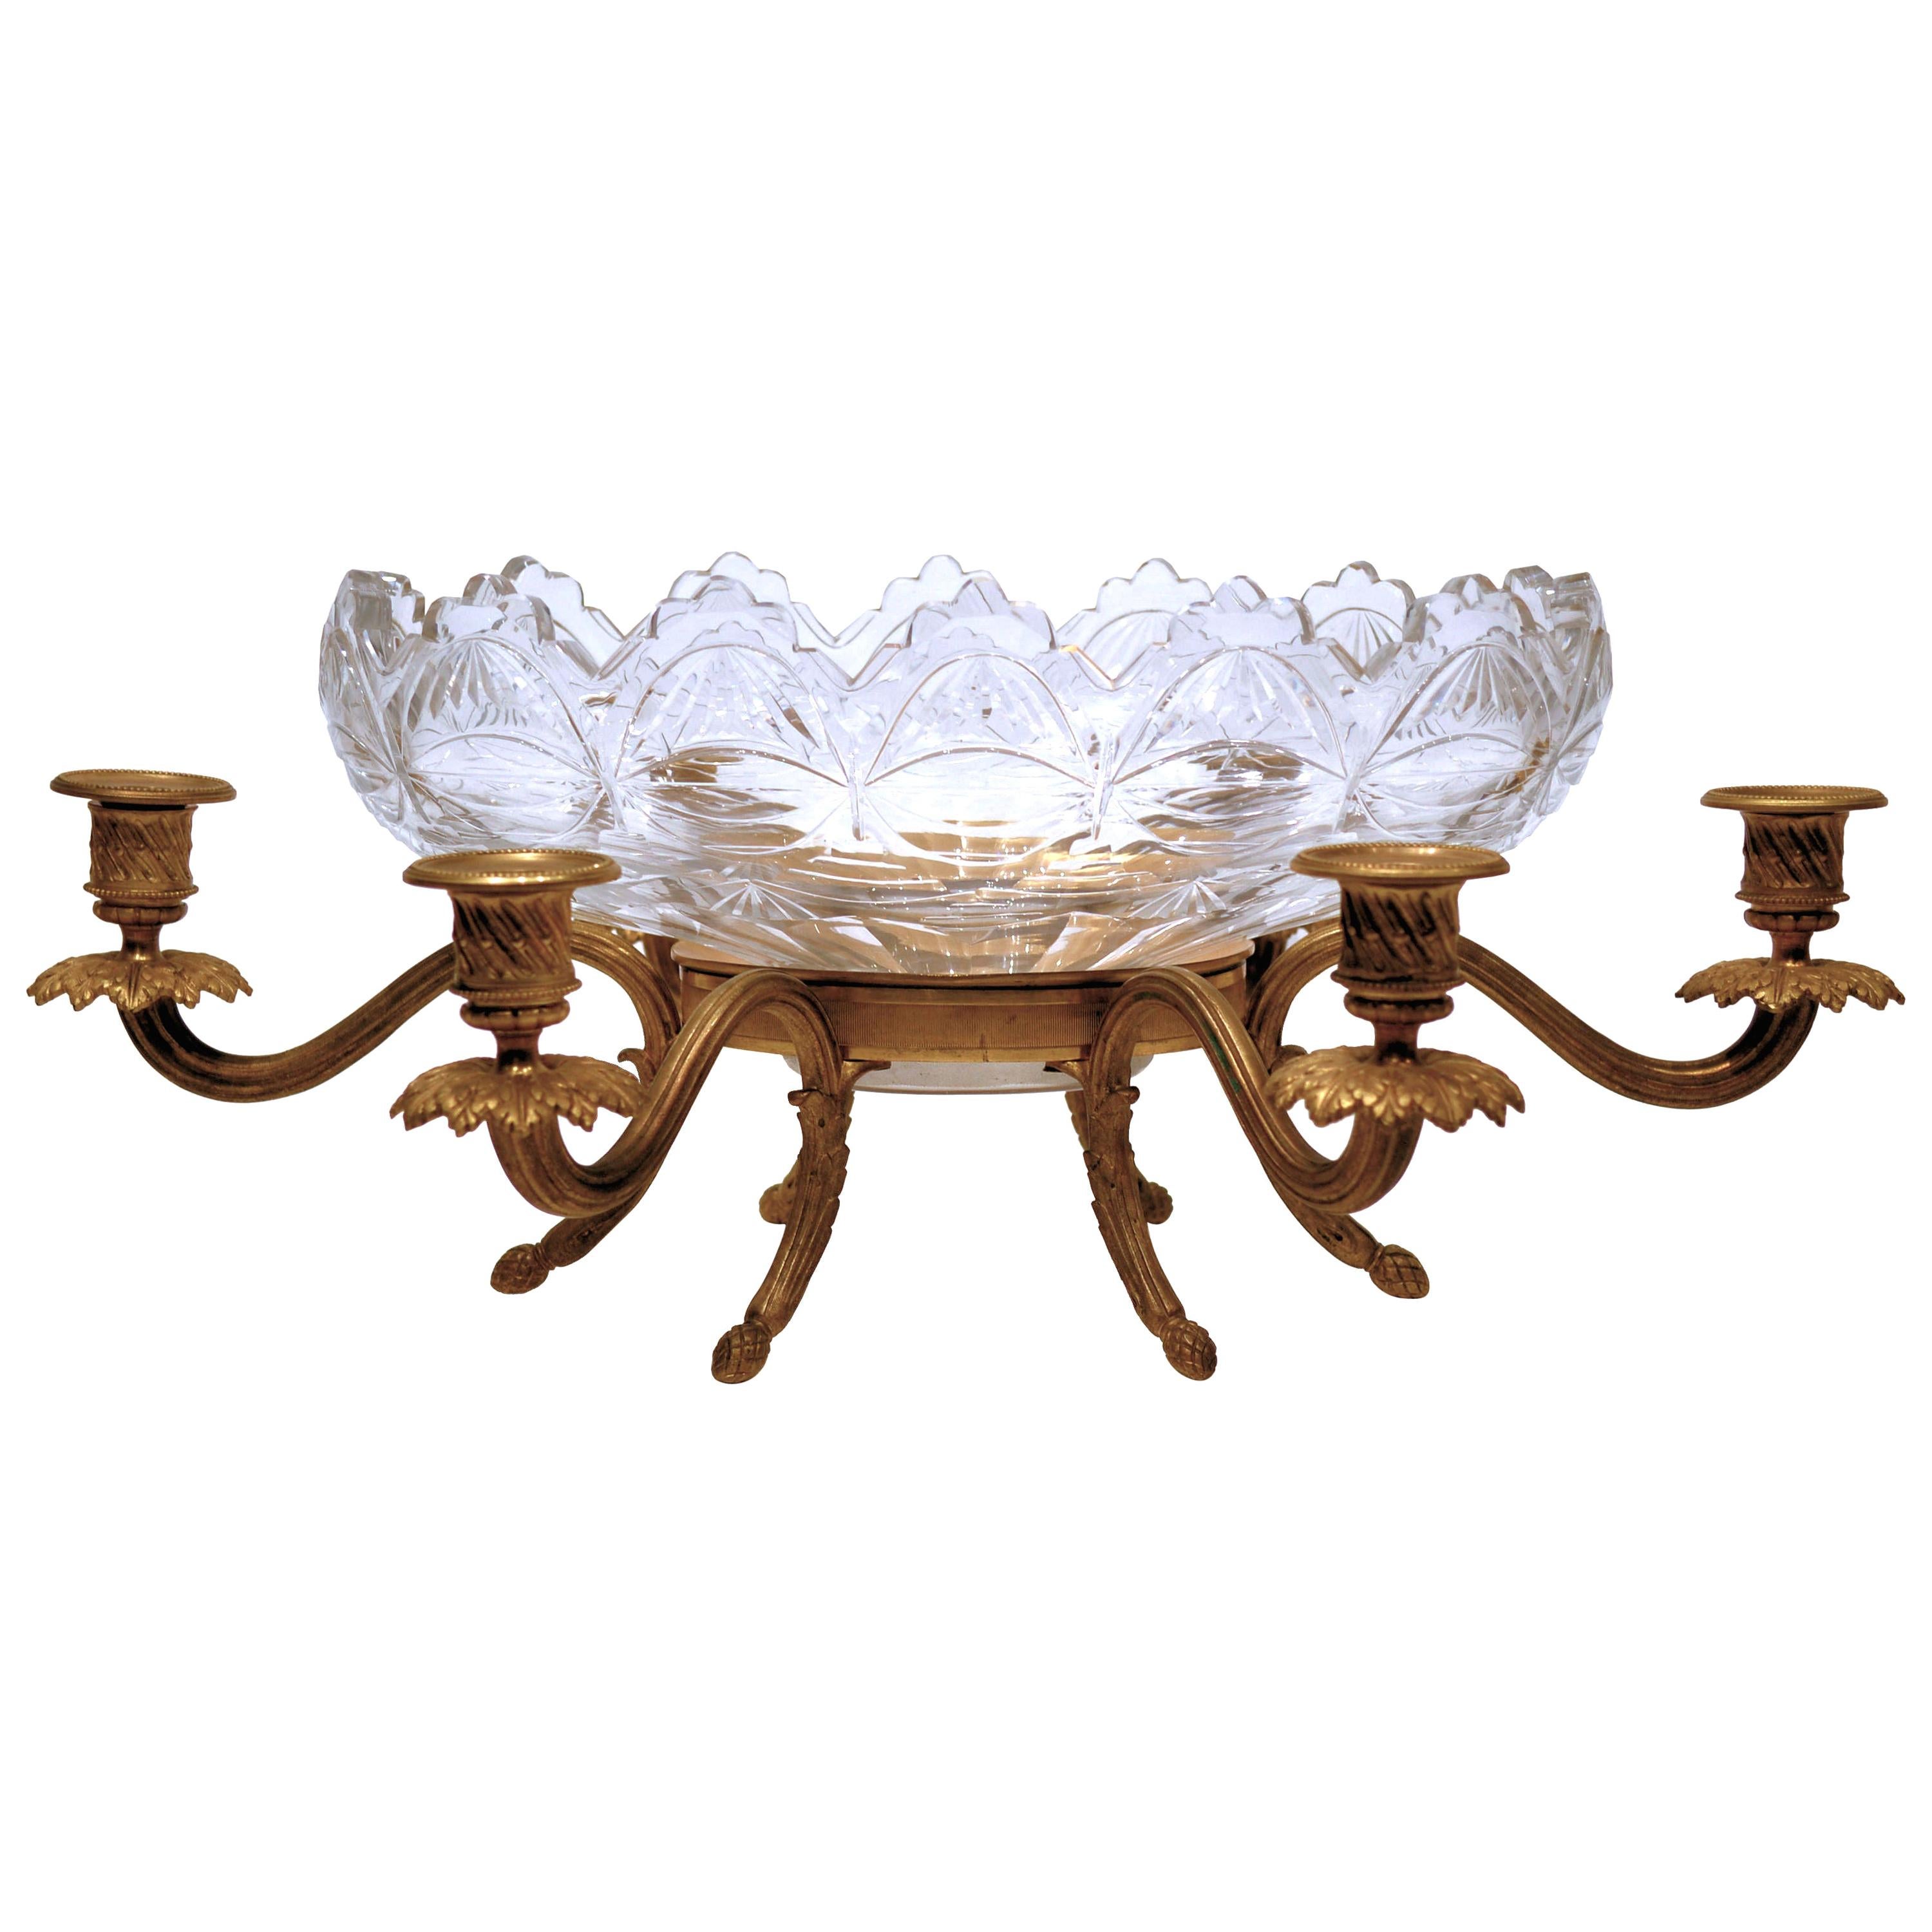 French 19th Century Gilt Bronze and Cut Crystal Glass Centerpiece Candelabra